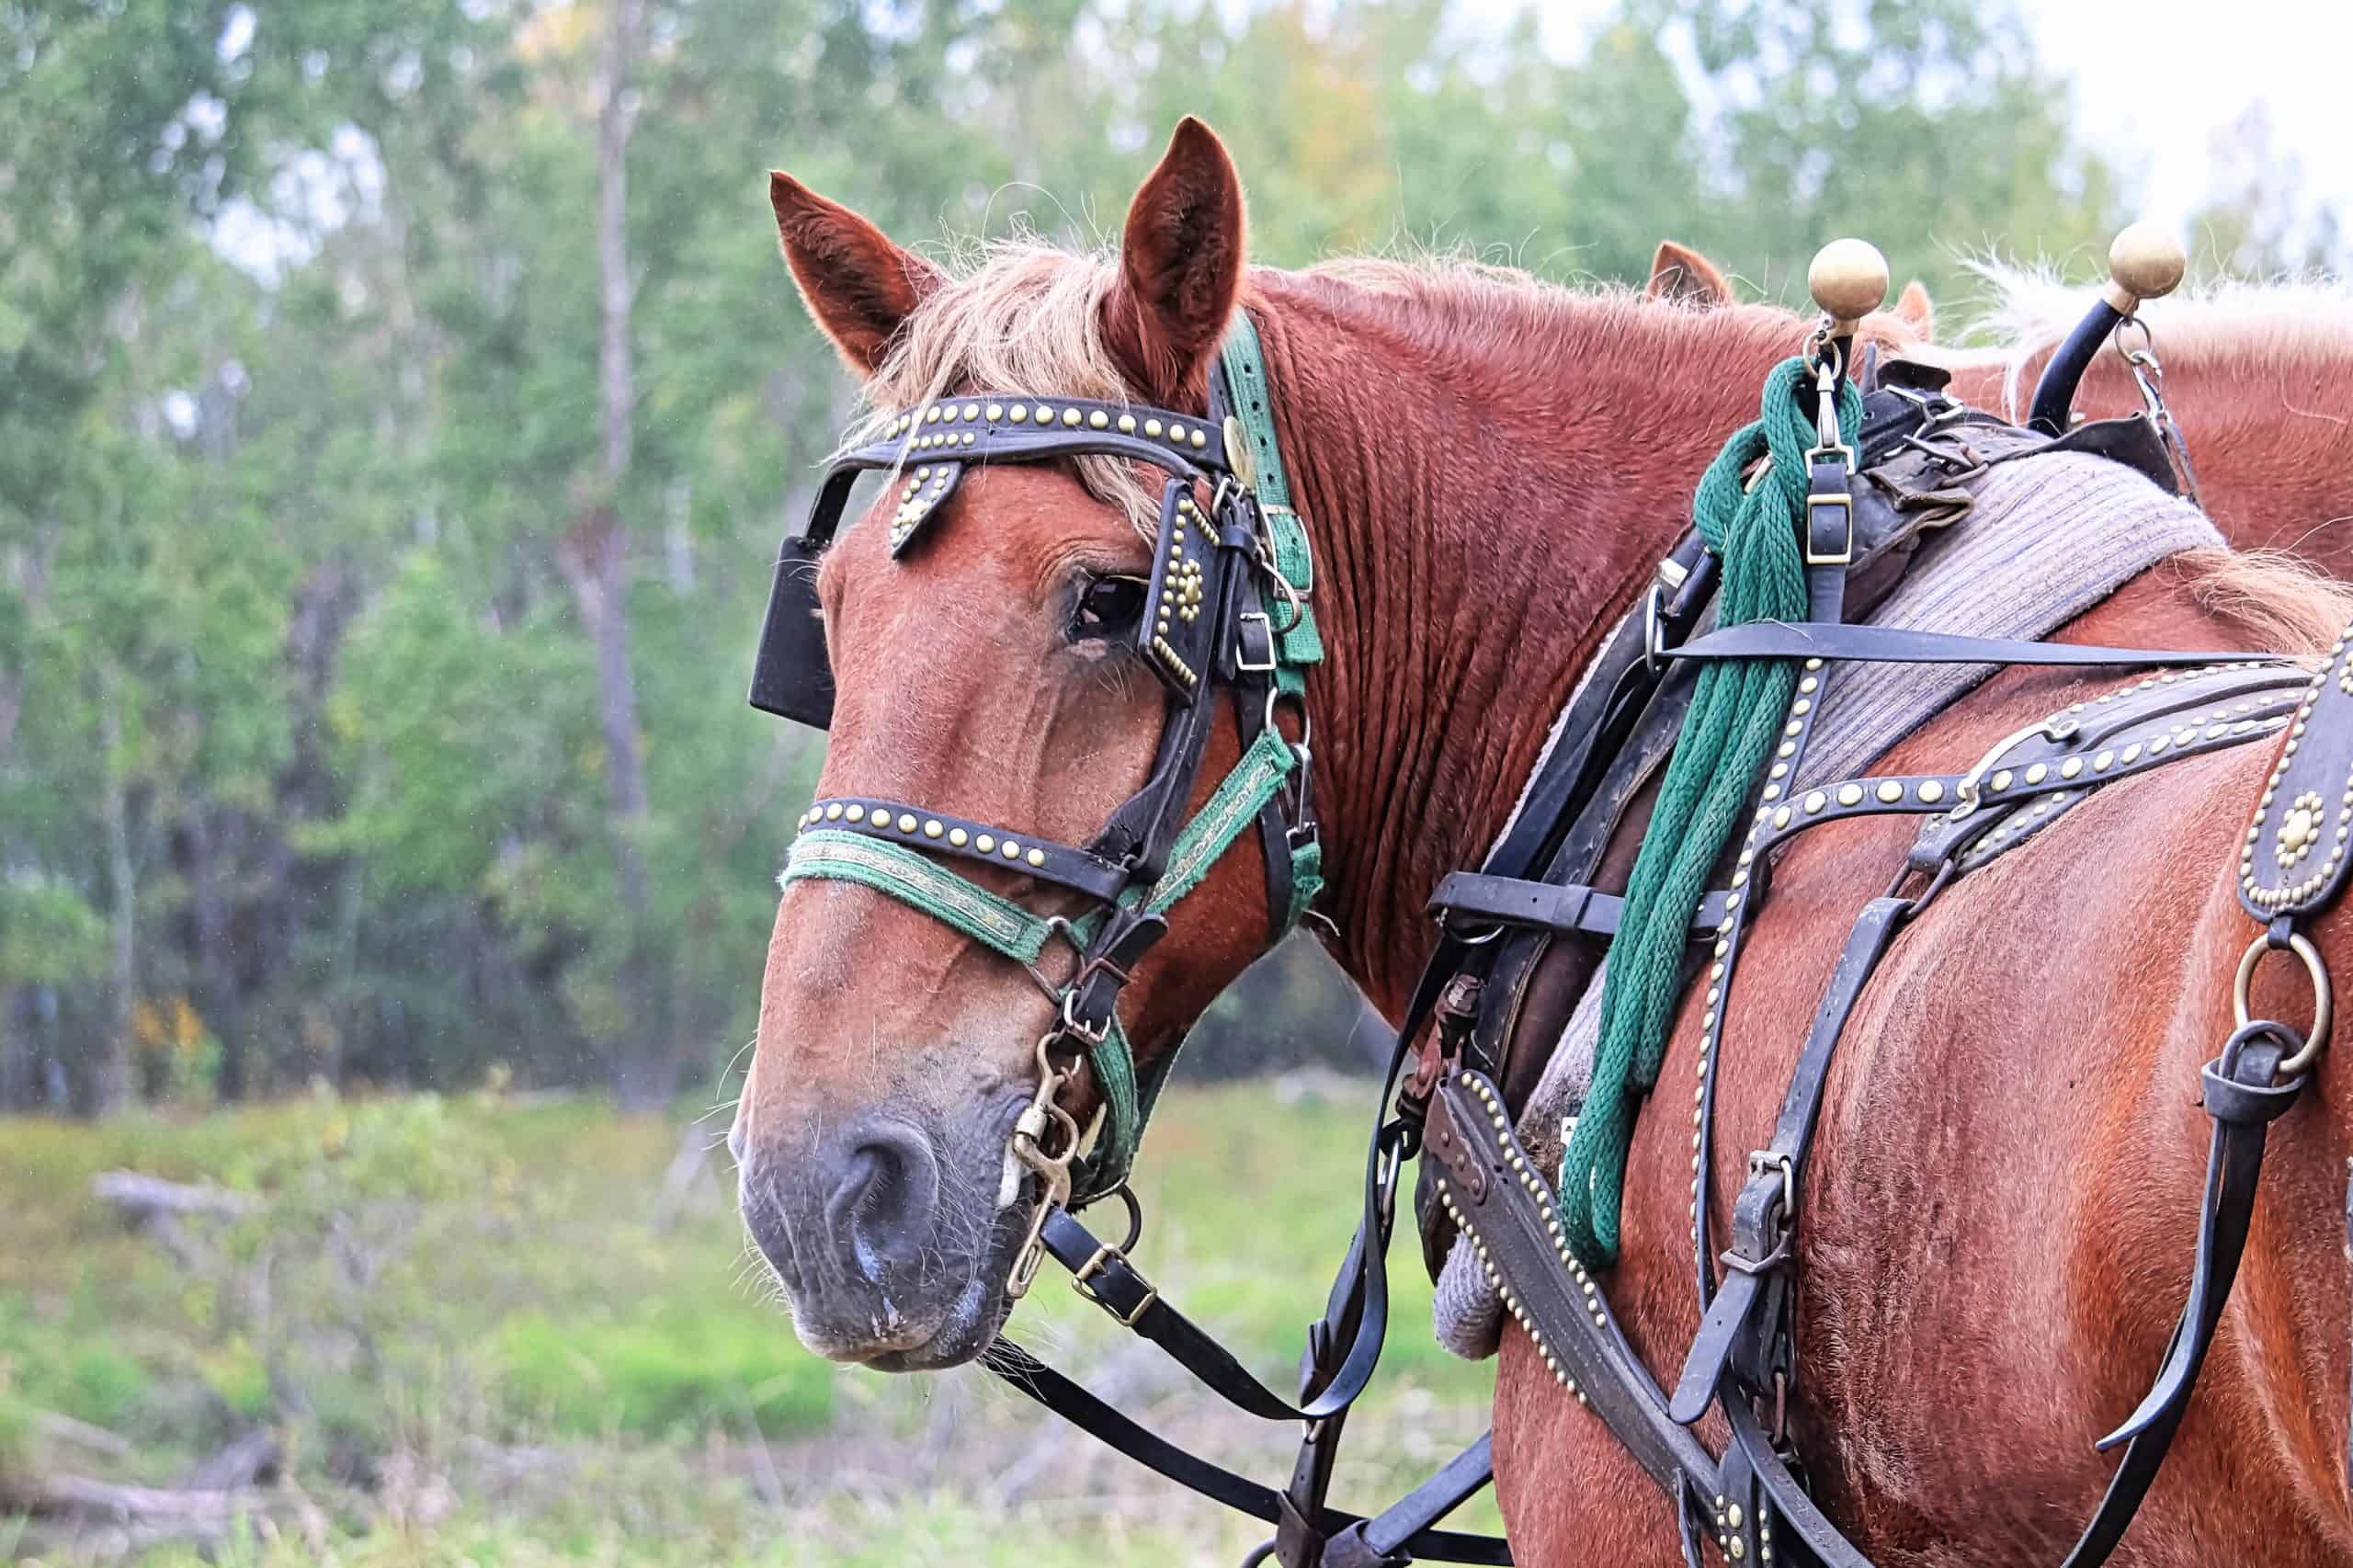 A horse looking back while harnessed up.